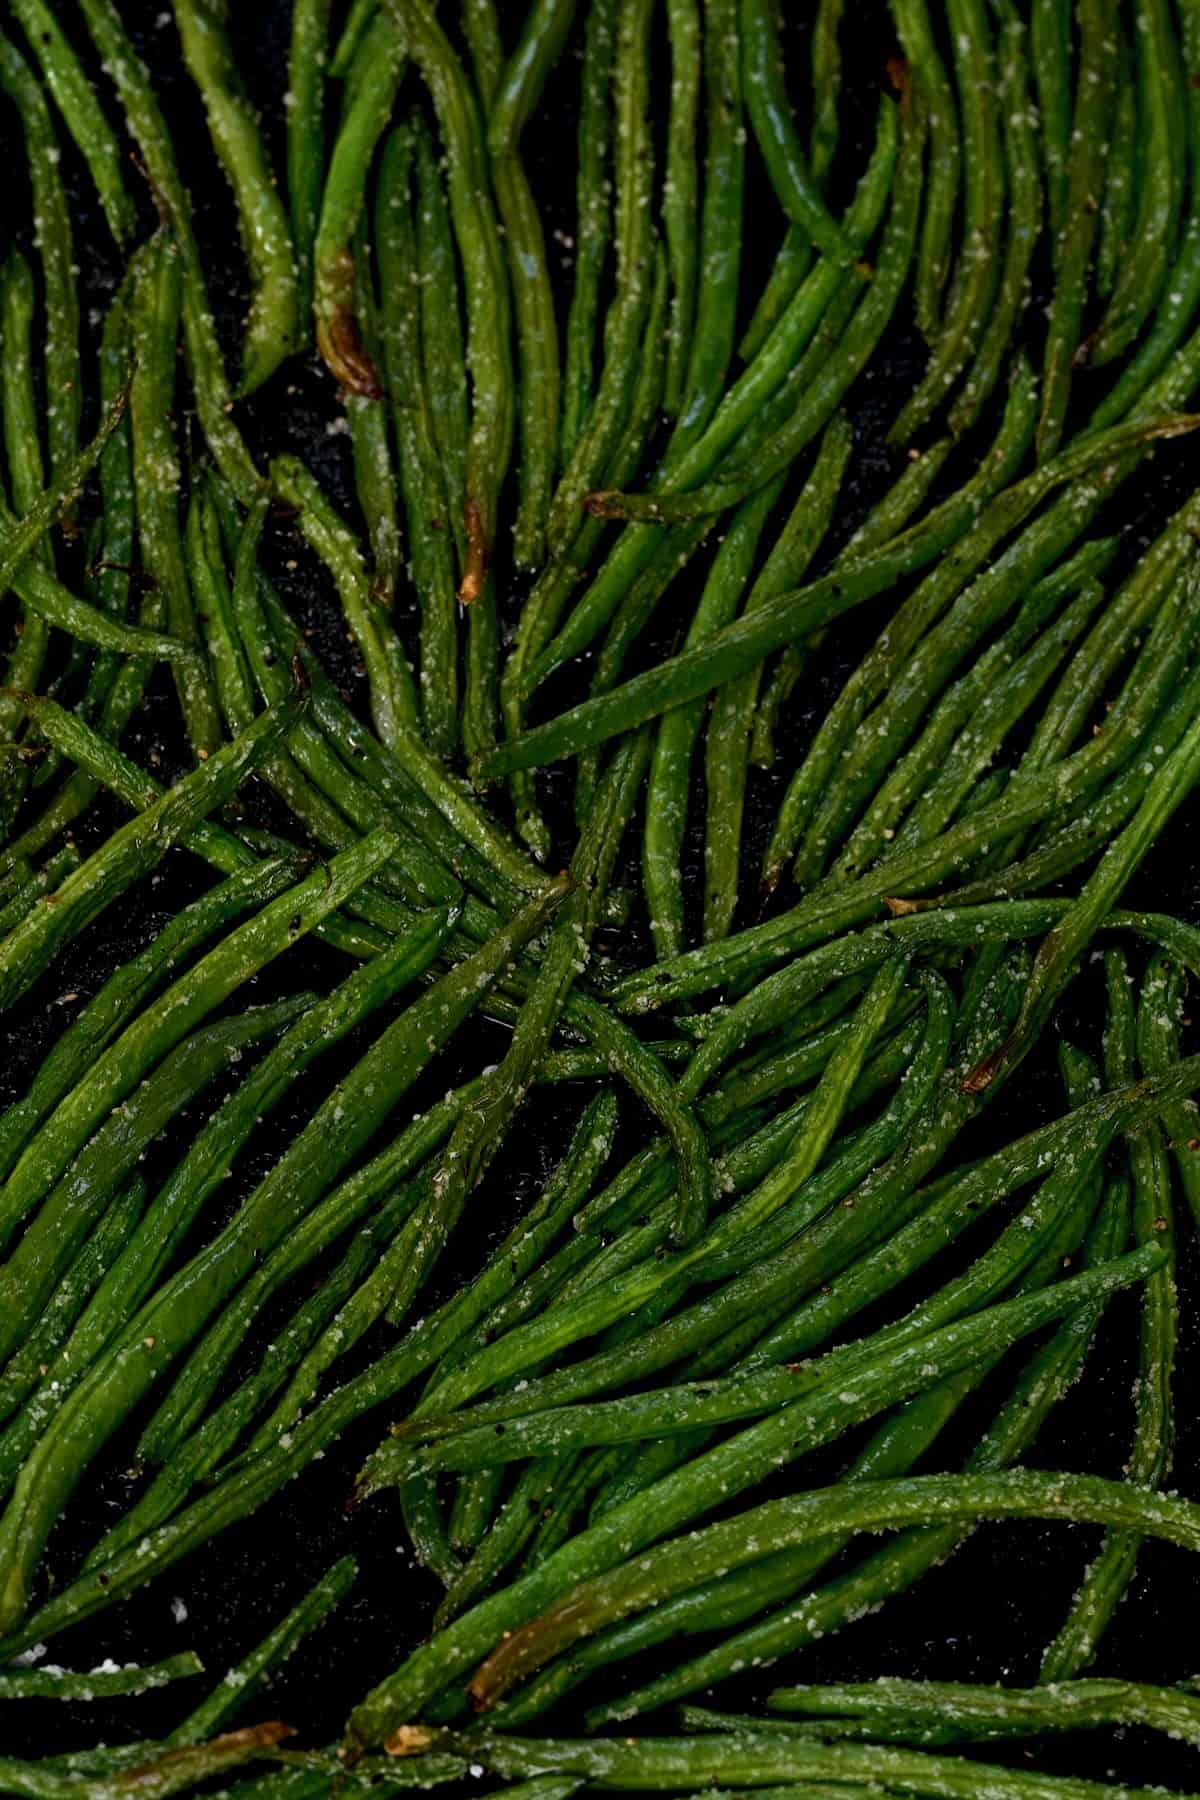 A close up of roasted green beans